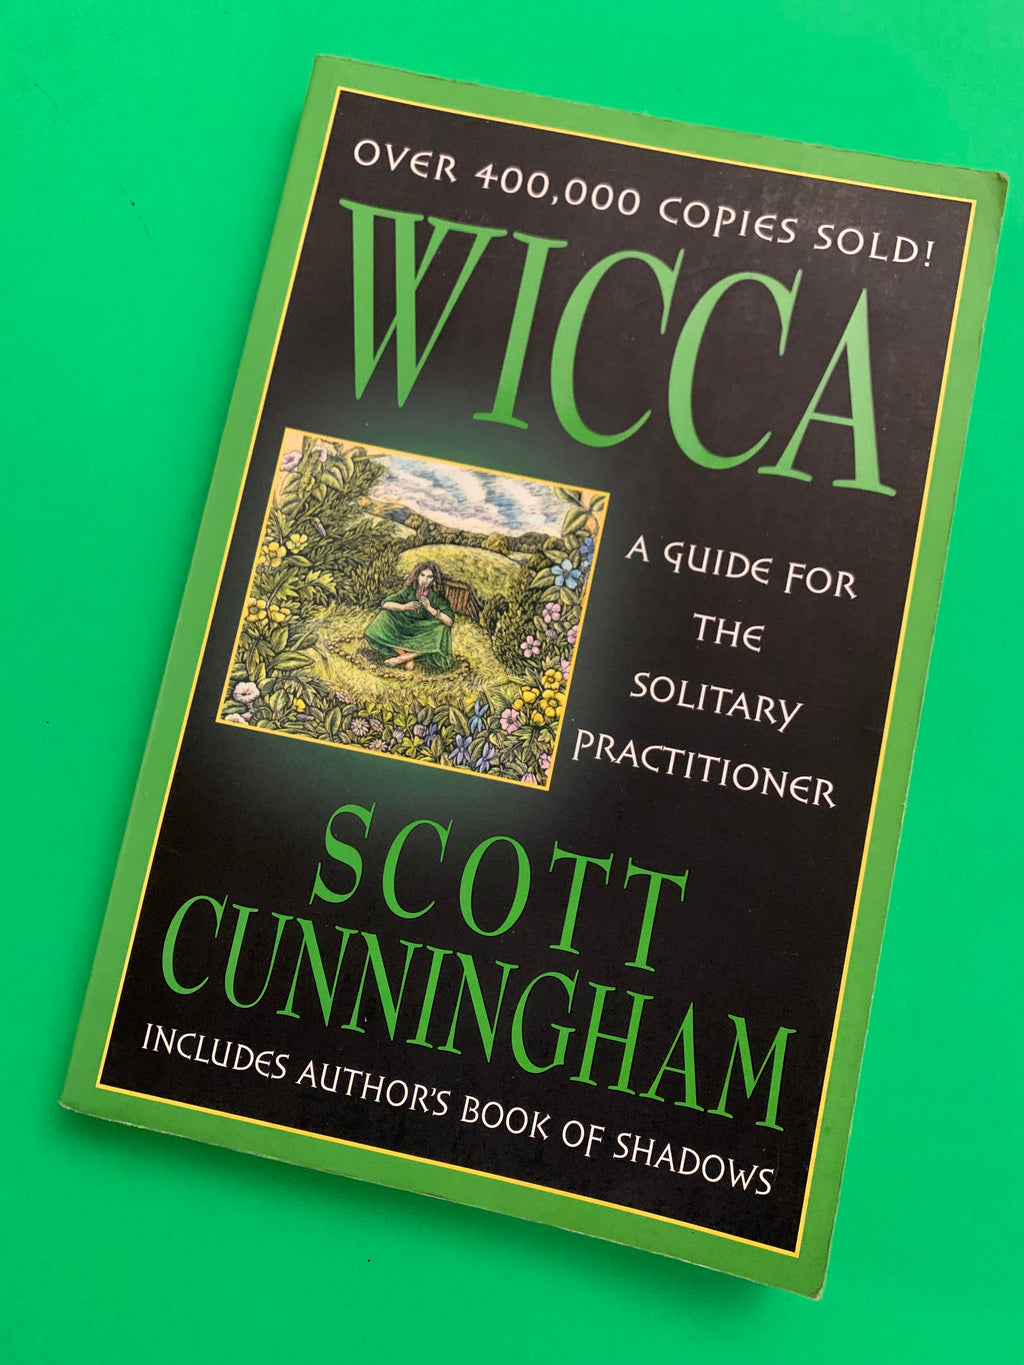 Wicca: A Guide for the Solitary Practitioner- By Scott Cunningham